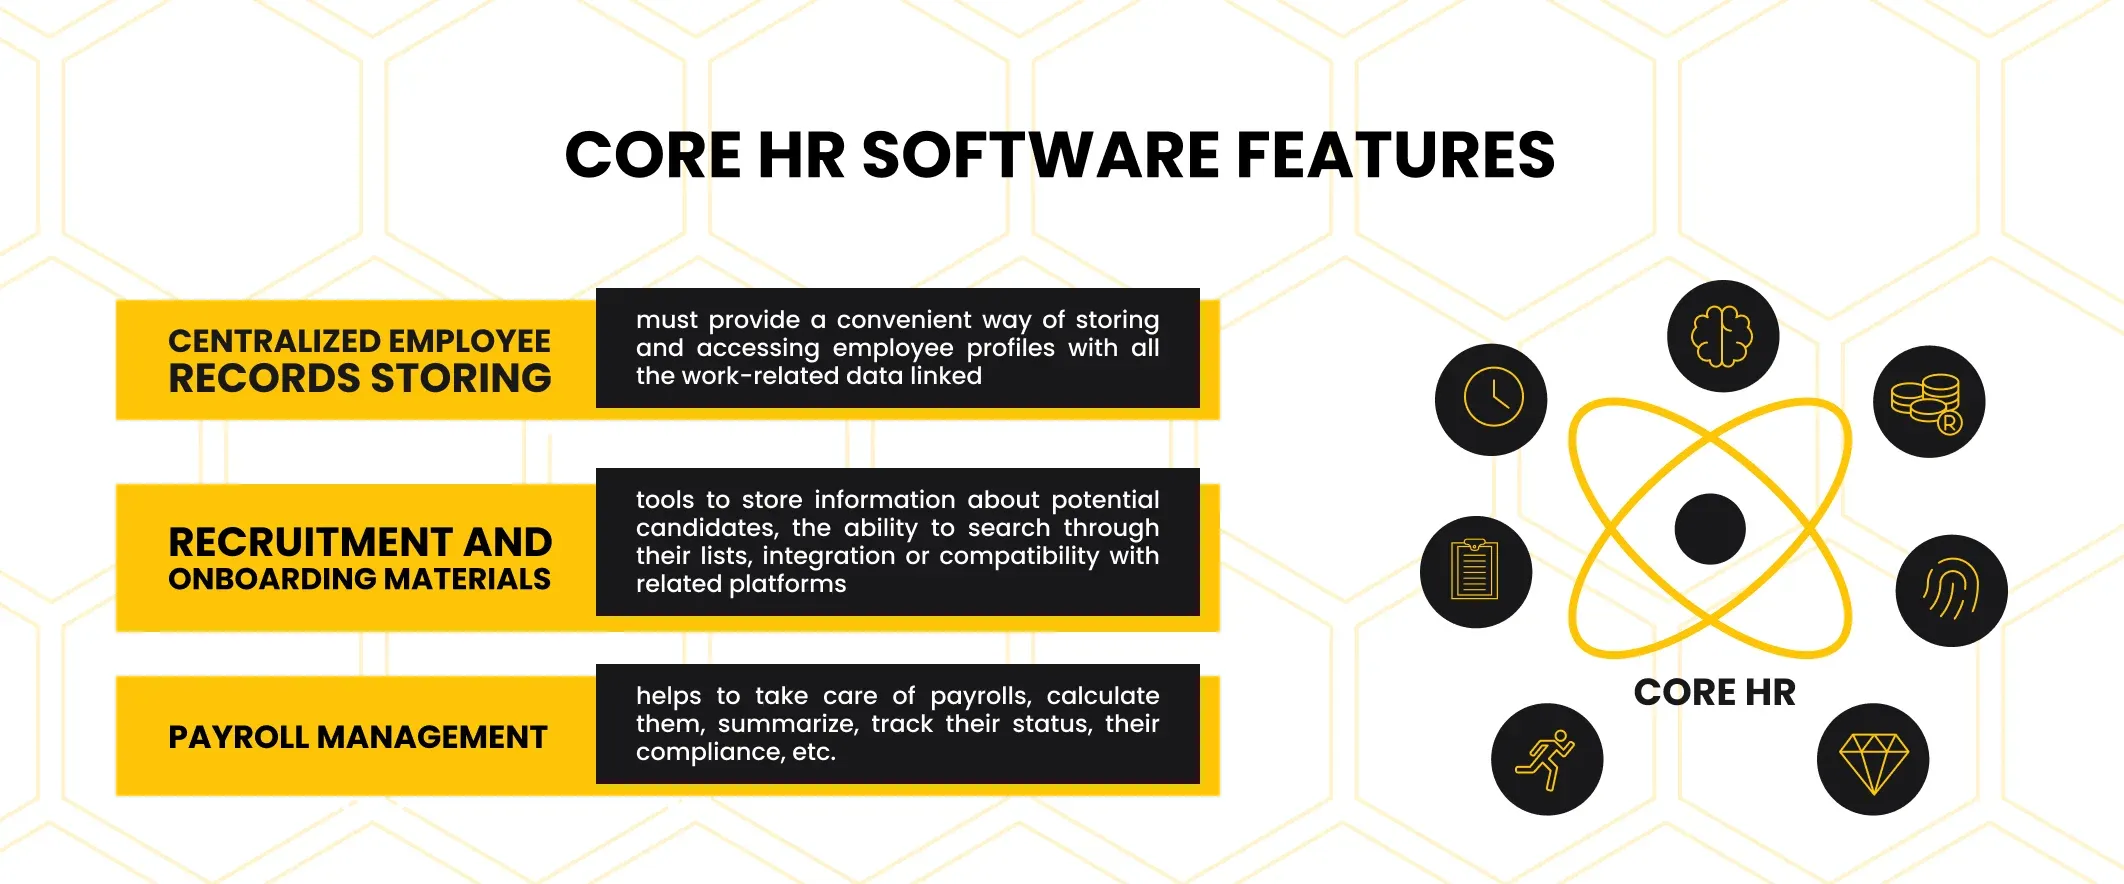 core HR software features